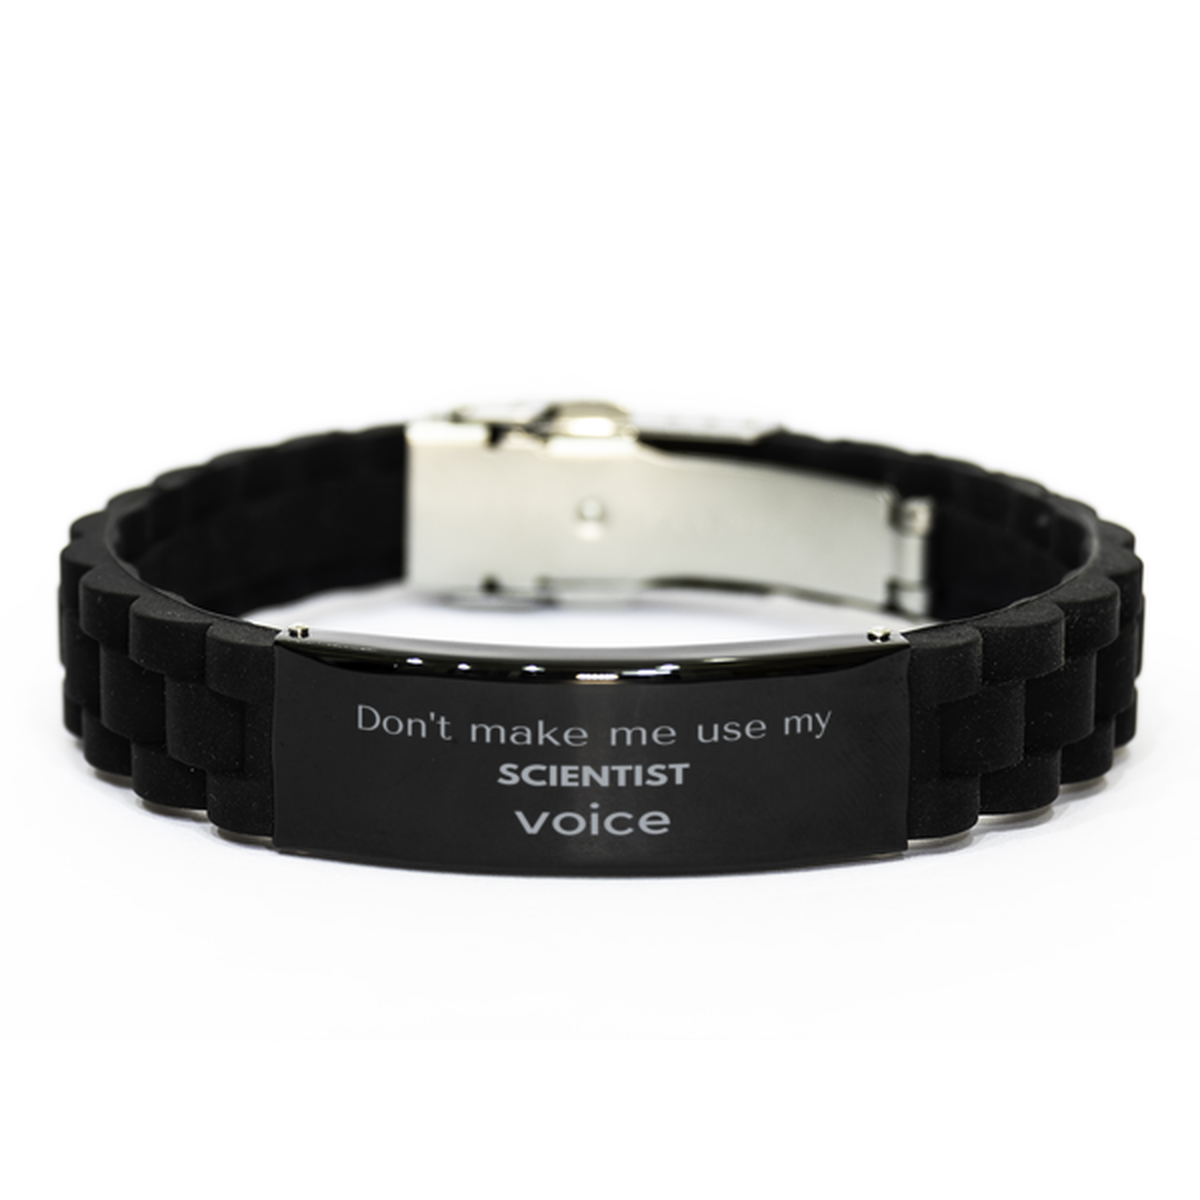 Don't make me use my Scientist voice, Sarcasm Scientist Gifts, Christmas Scientist Black Glidelock Clasp Bracelet Birthday Unique Gifts For Scientist Coworkers, Men, Women, Colleague, Friends